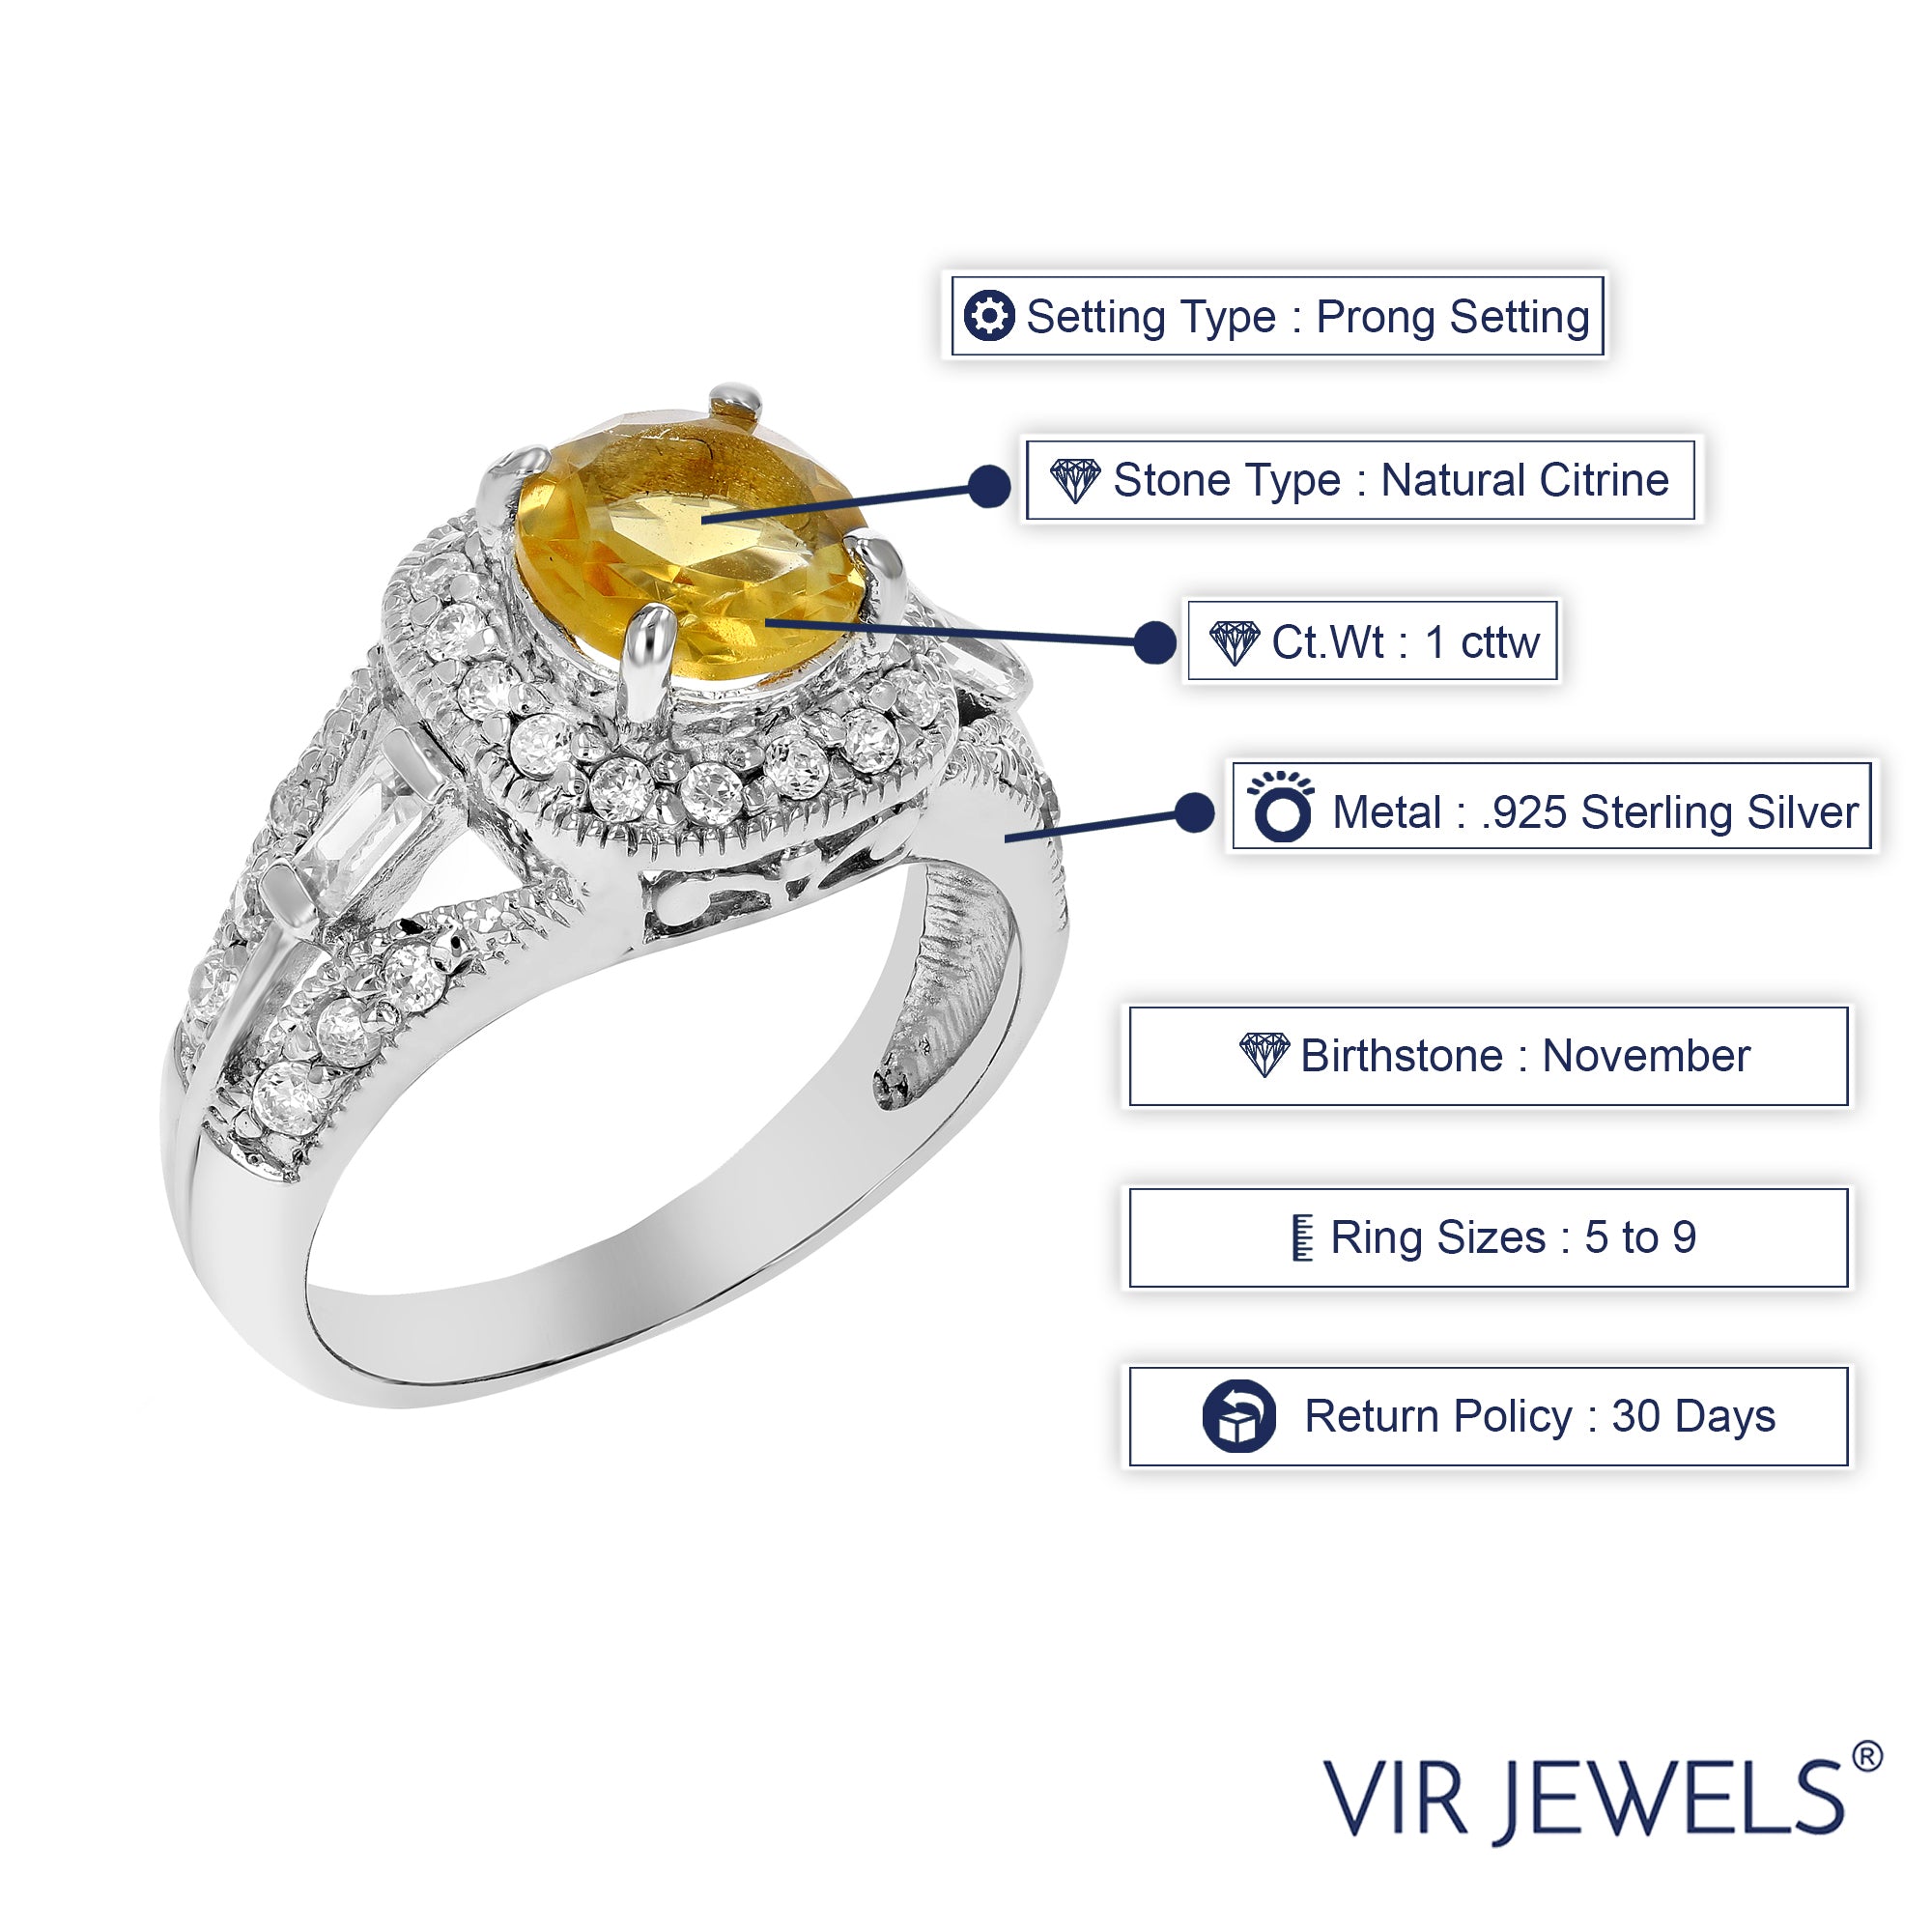 1 cttw Citrine Ring .925 Sterling Silver with Rhodium Plating Round Shape 7 MM